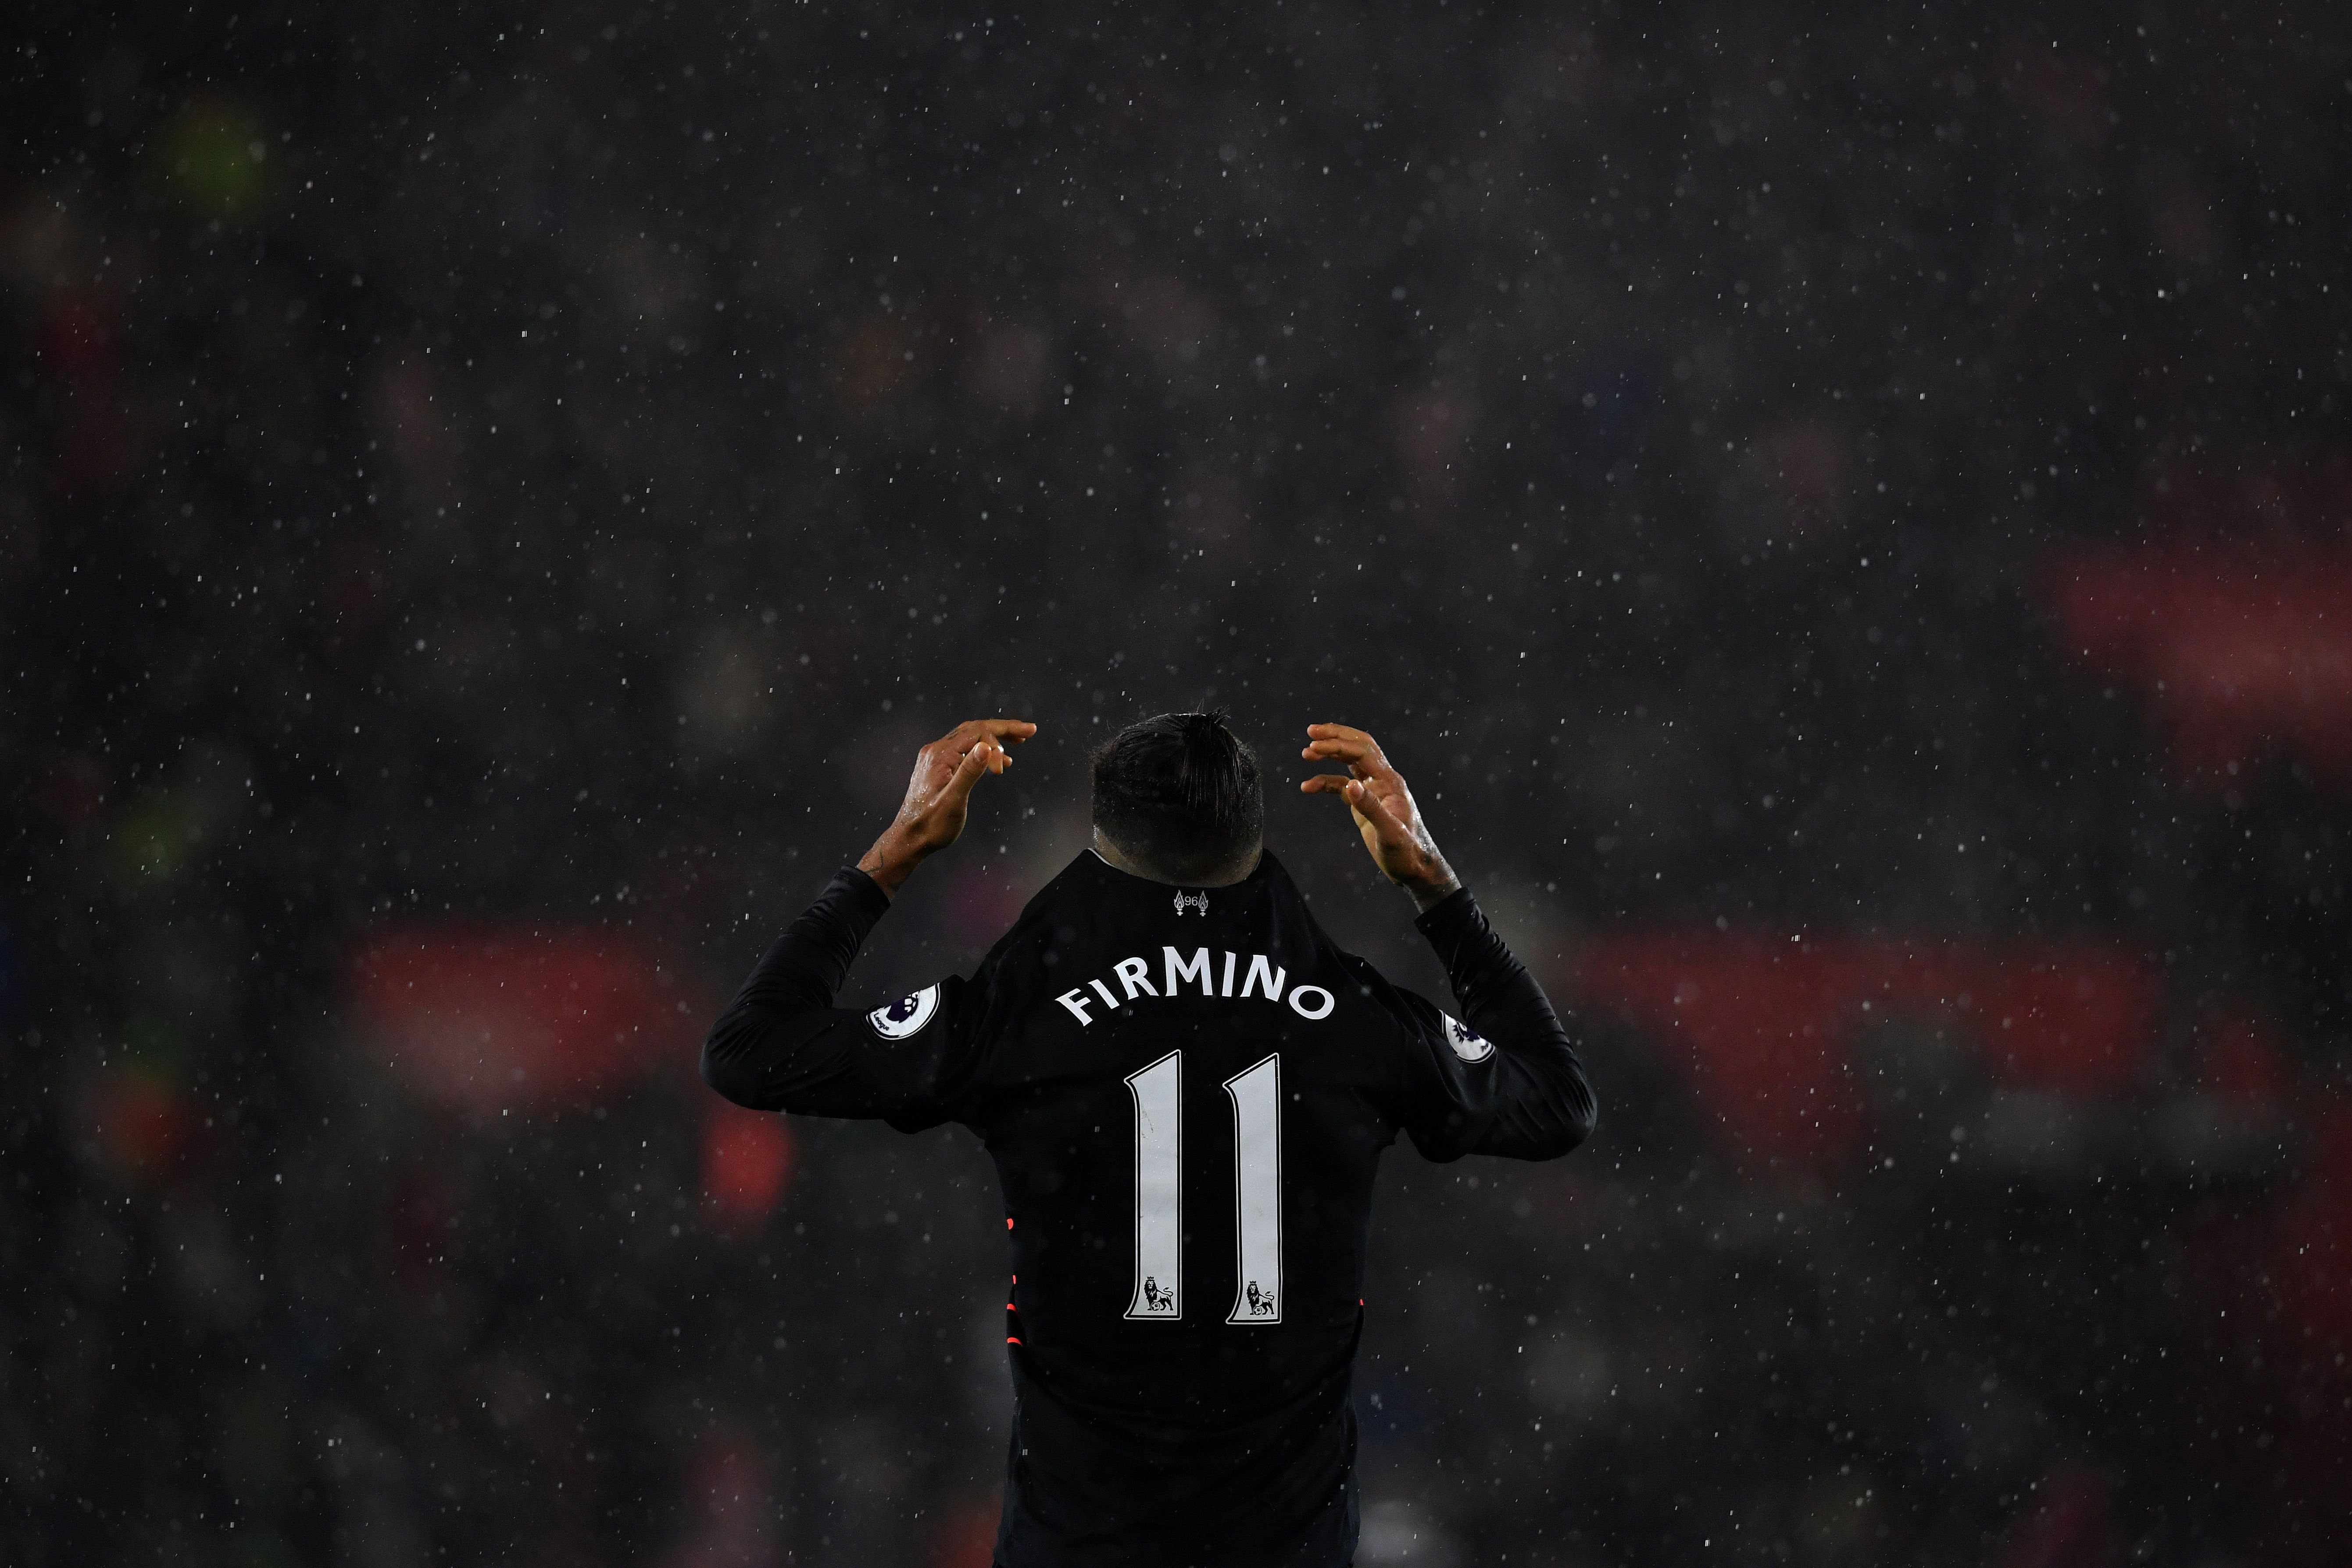 TOPSHOT - Liverpool's Brazilian midfielder Roberto Firmino reacts at the final whistle during the English Premier League football match between Southampton and Liverpool at St Mary's Stadium in Southampton, southern England on November 19, 2016. / AFP / BEN STANSALL / RESTRICTED TO EDITORIAL USE. No use with unauthorized audio, video, data, fixture lists, club/league logos or 'live' services. Online in-match use limited to 75 images, no video emulation. No use in betting, games or single club/league/player publications.  /         (Photo credit should read BEN STANSALL/AFP/Getty Images)